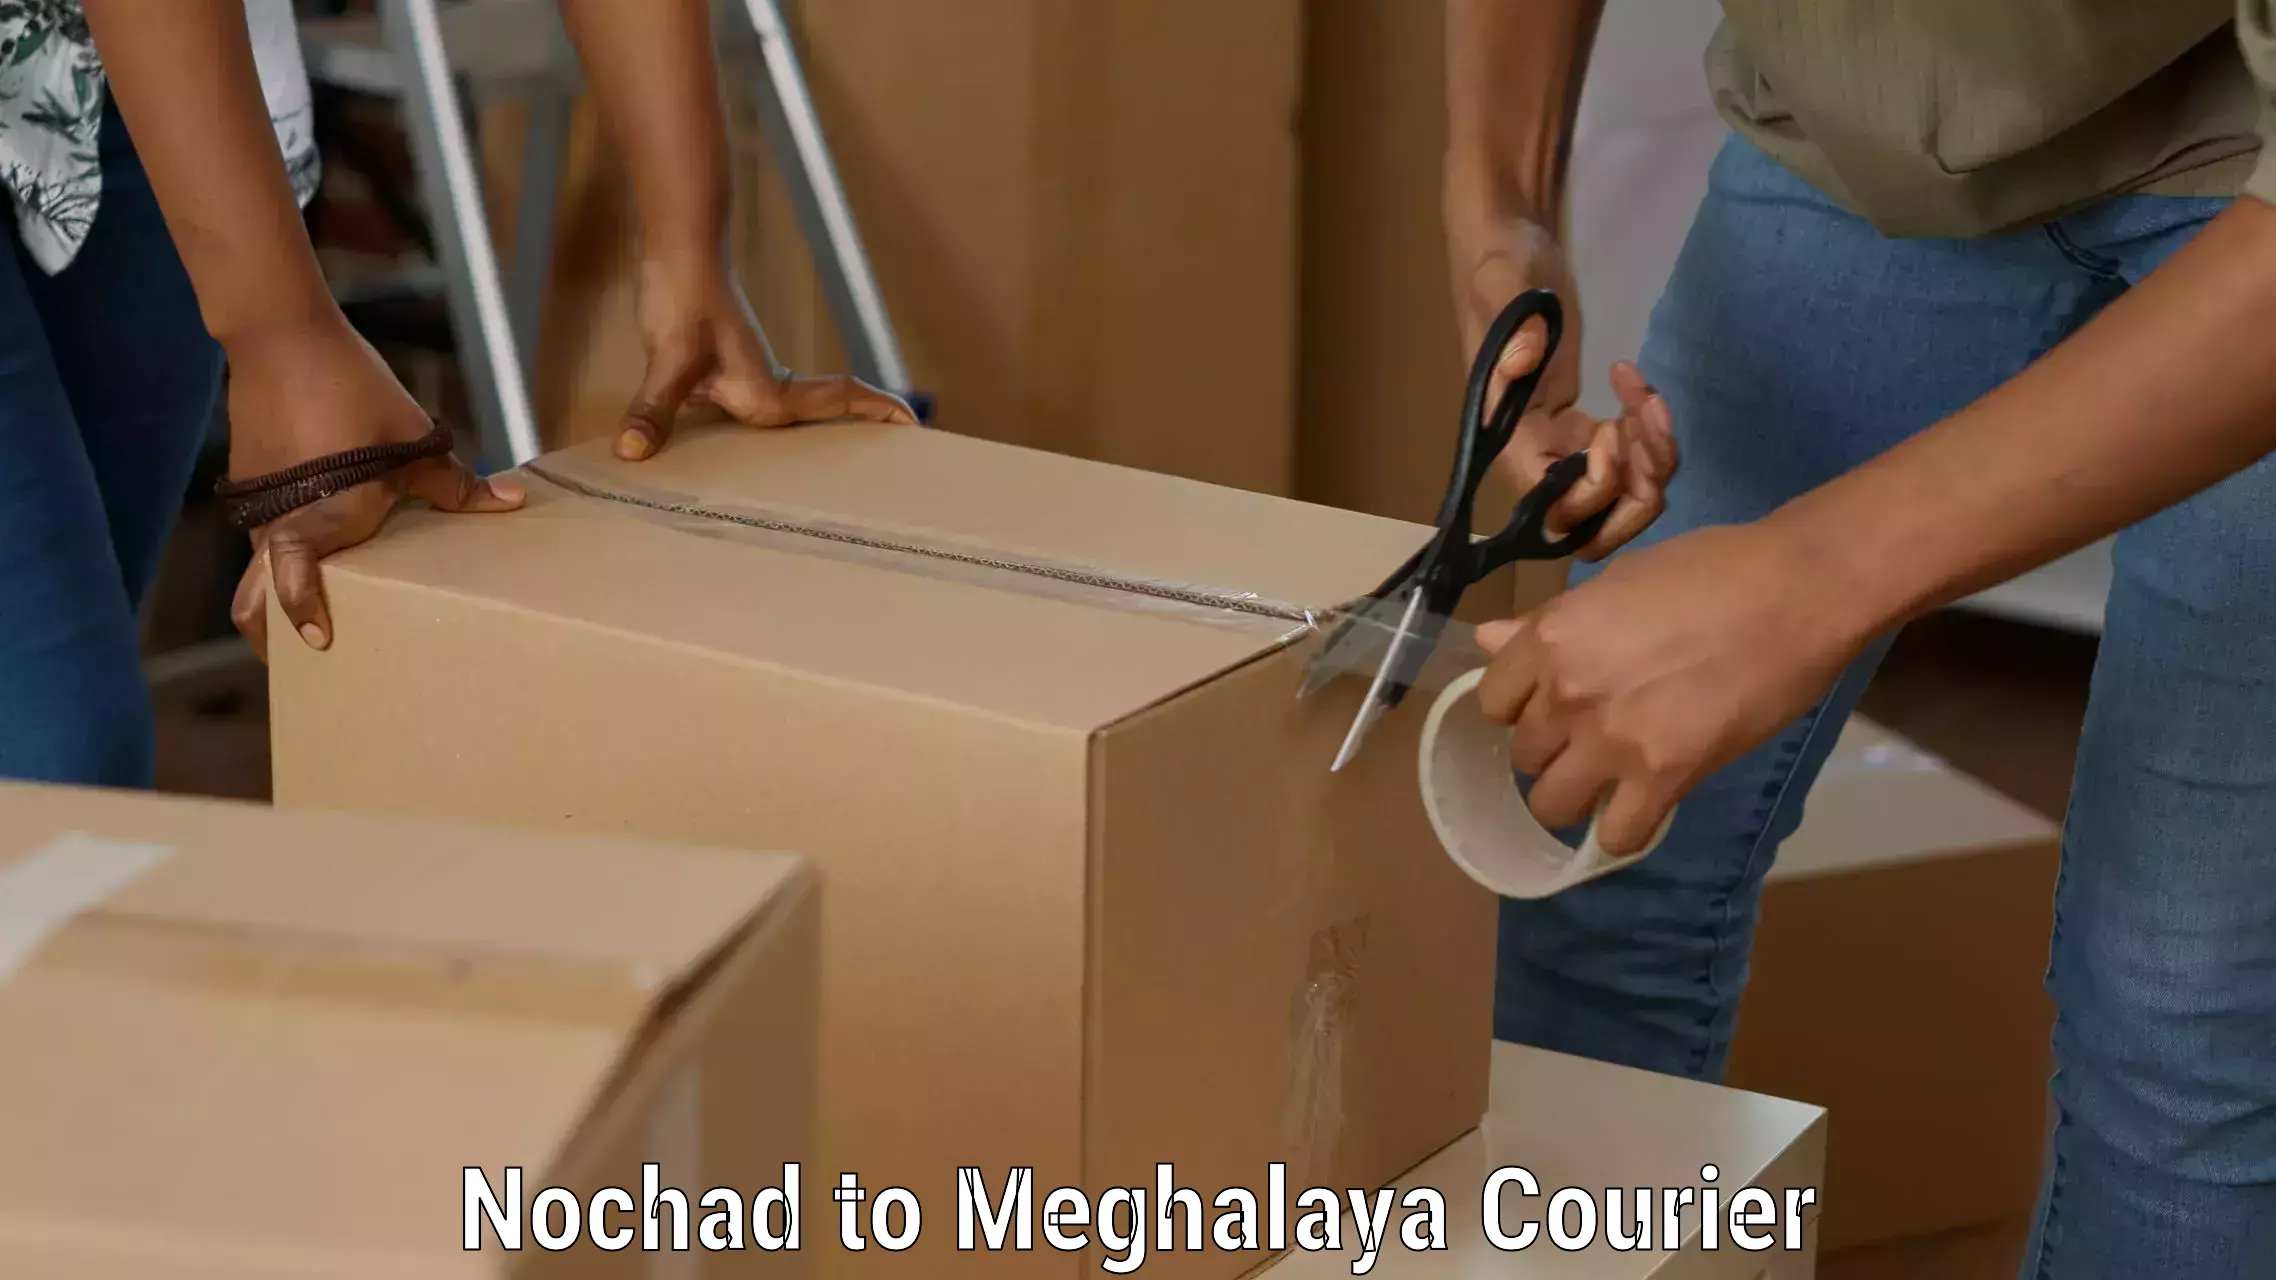 Fast delivery service Nochad to Meghalaya